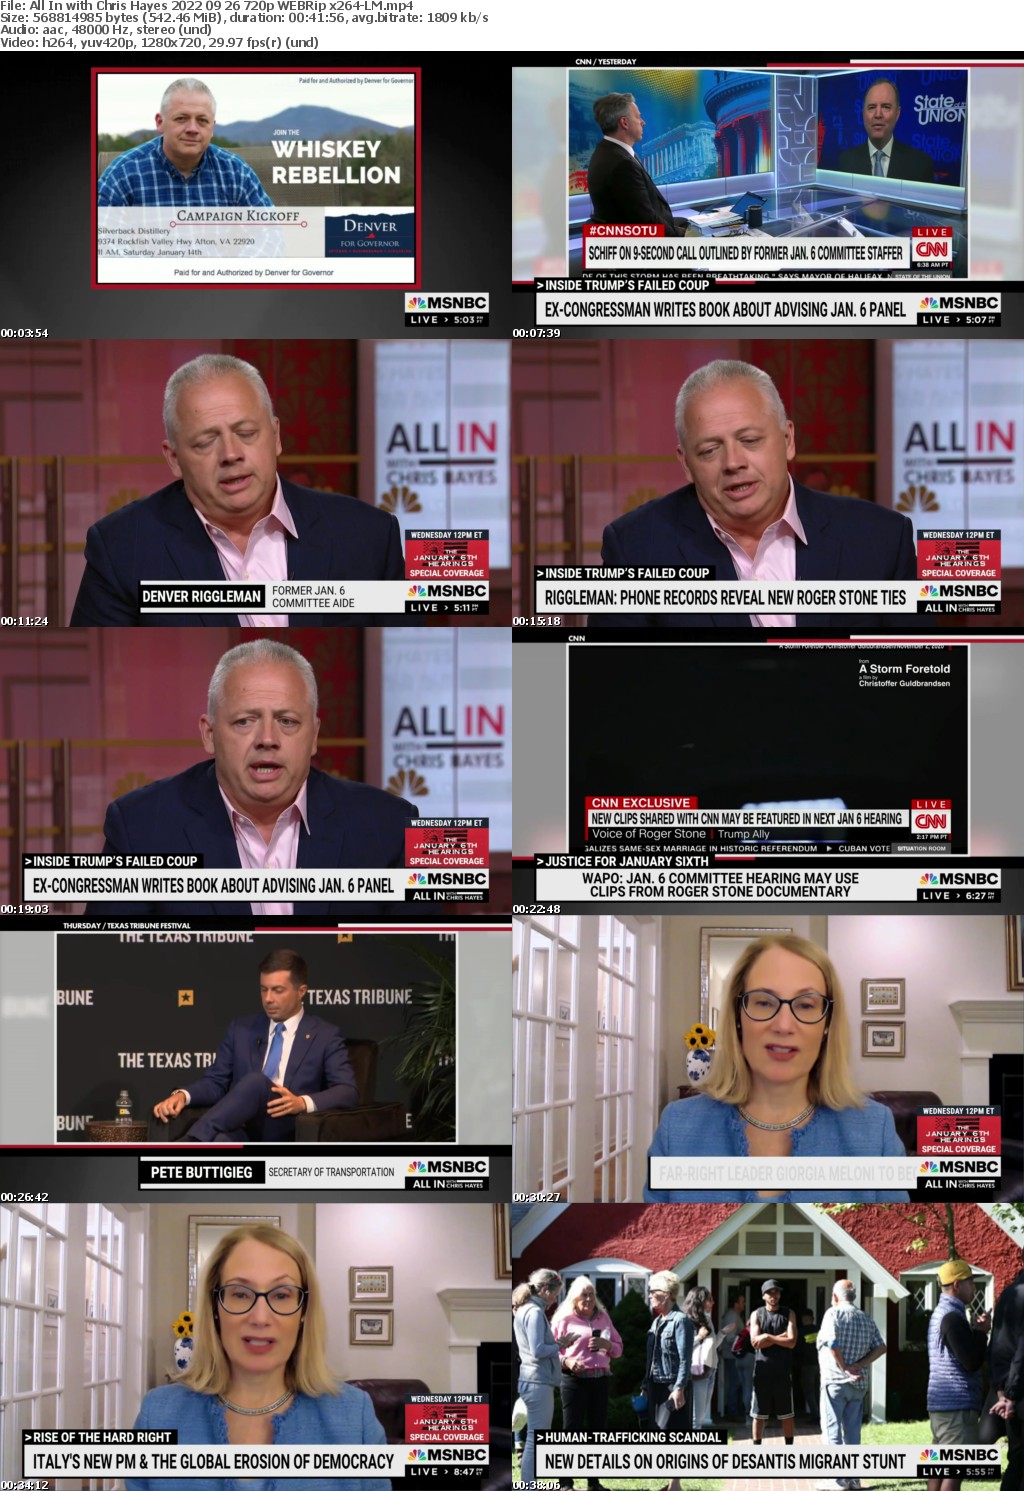 All In with Chris Hayes 2022 09 26 720p WEBRip x264-LM